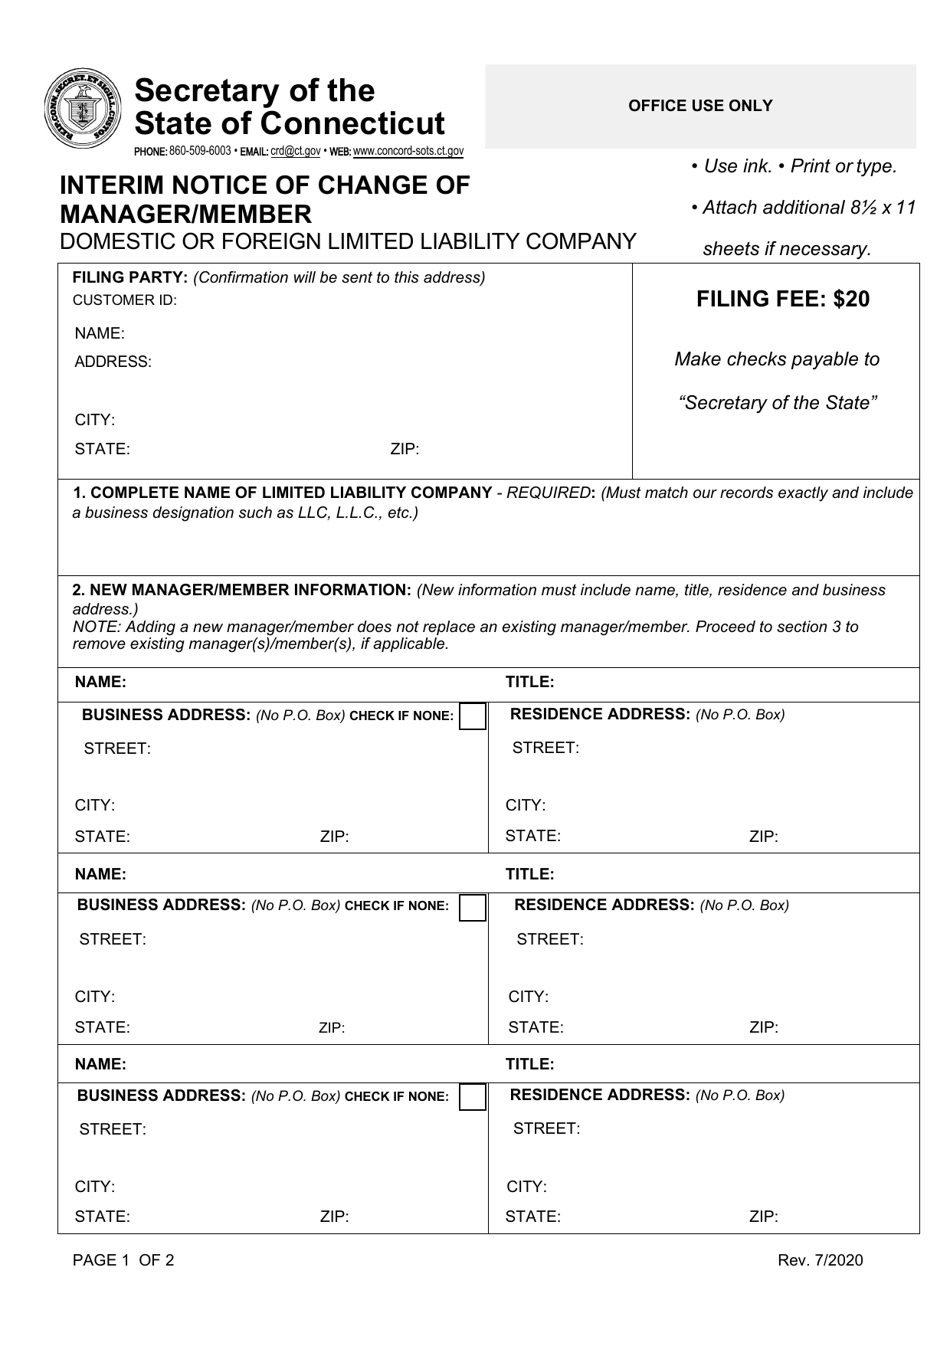 Interim Notice of Change of Manager / Member - Domestic or Foreign Limited Liability Company - Connecticut, Page 1